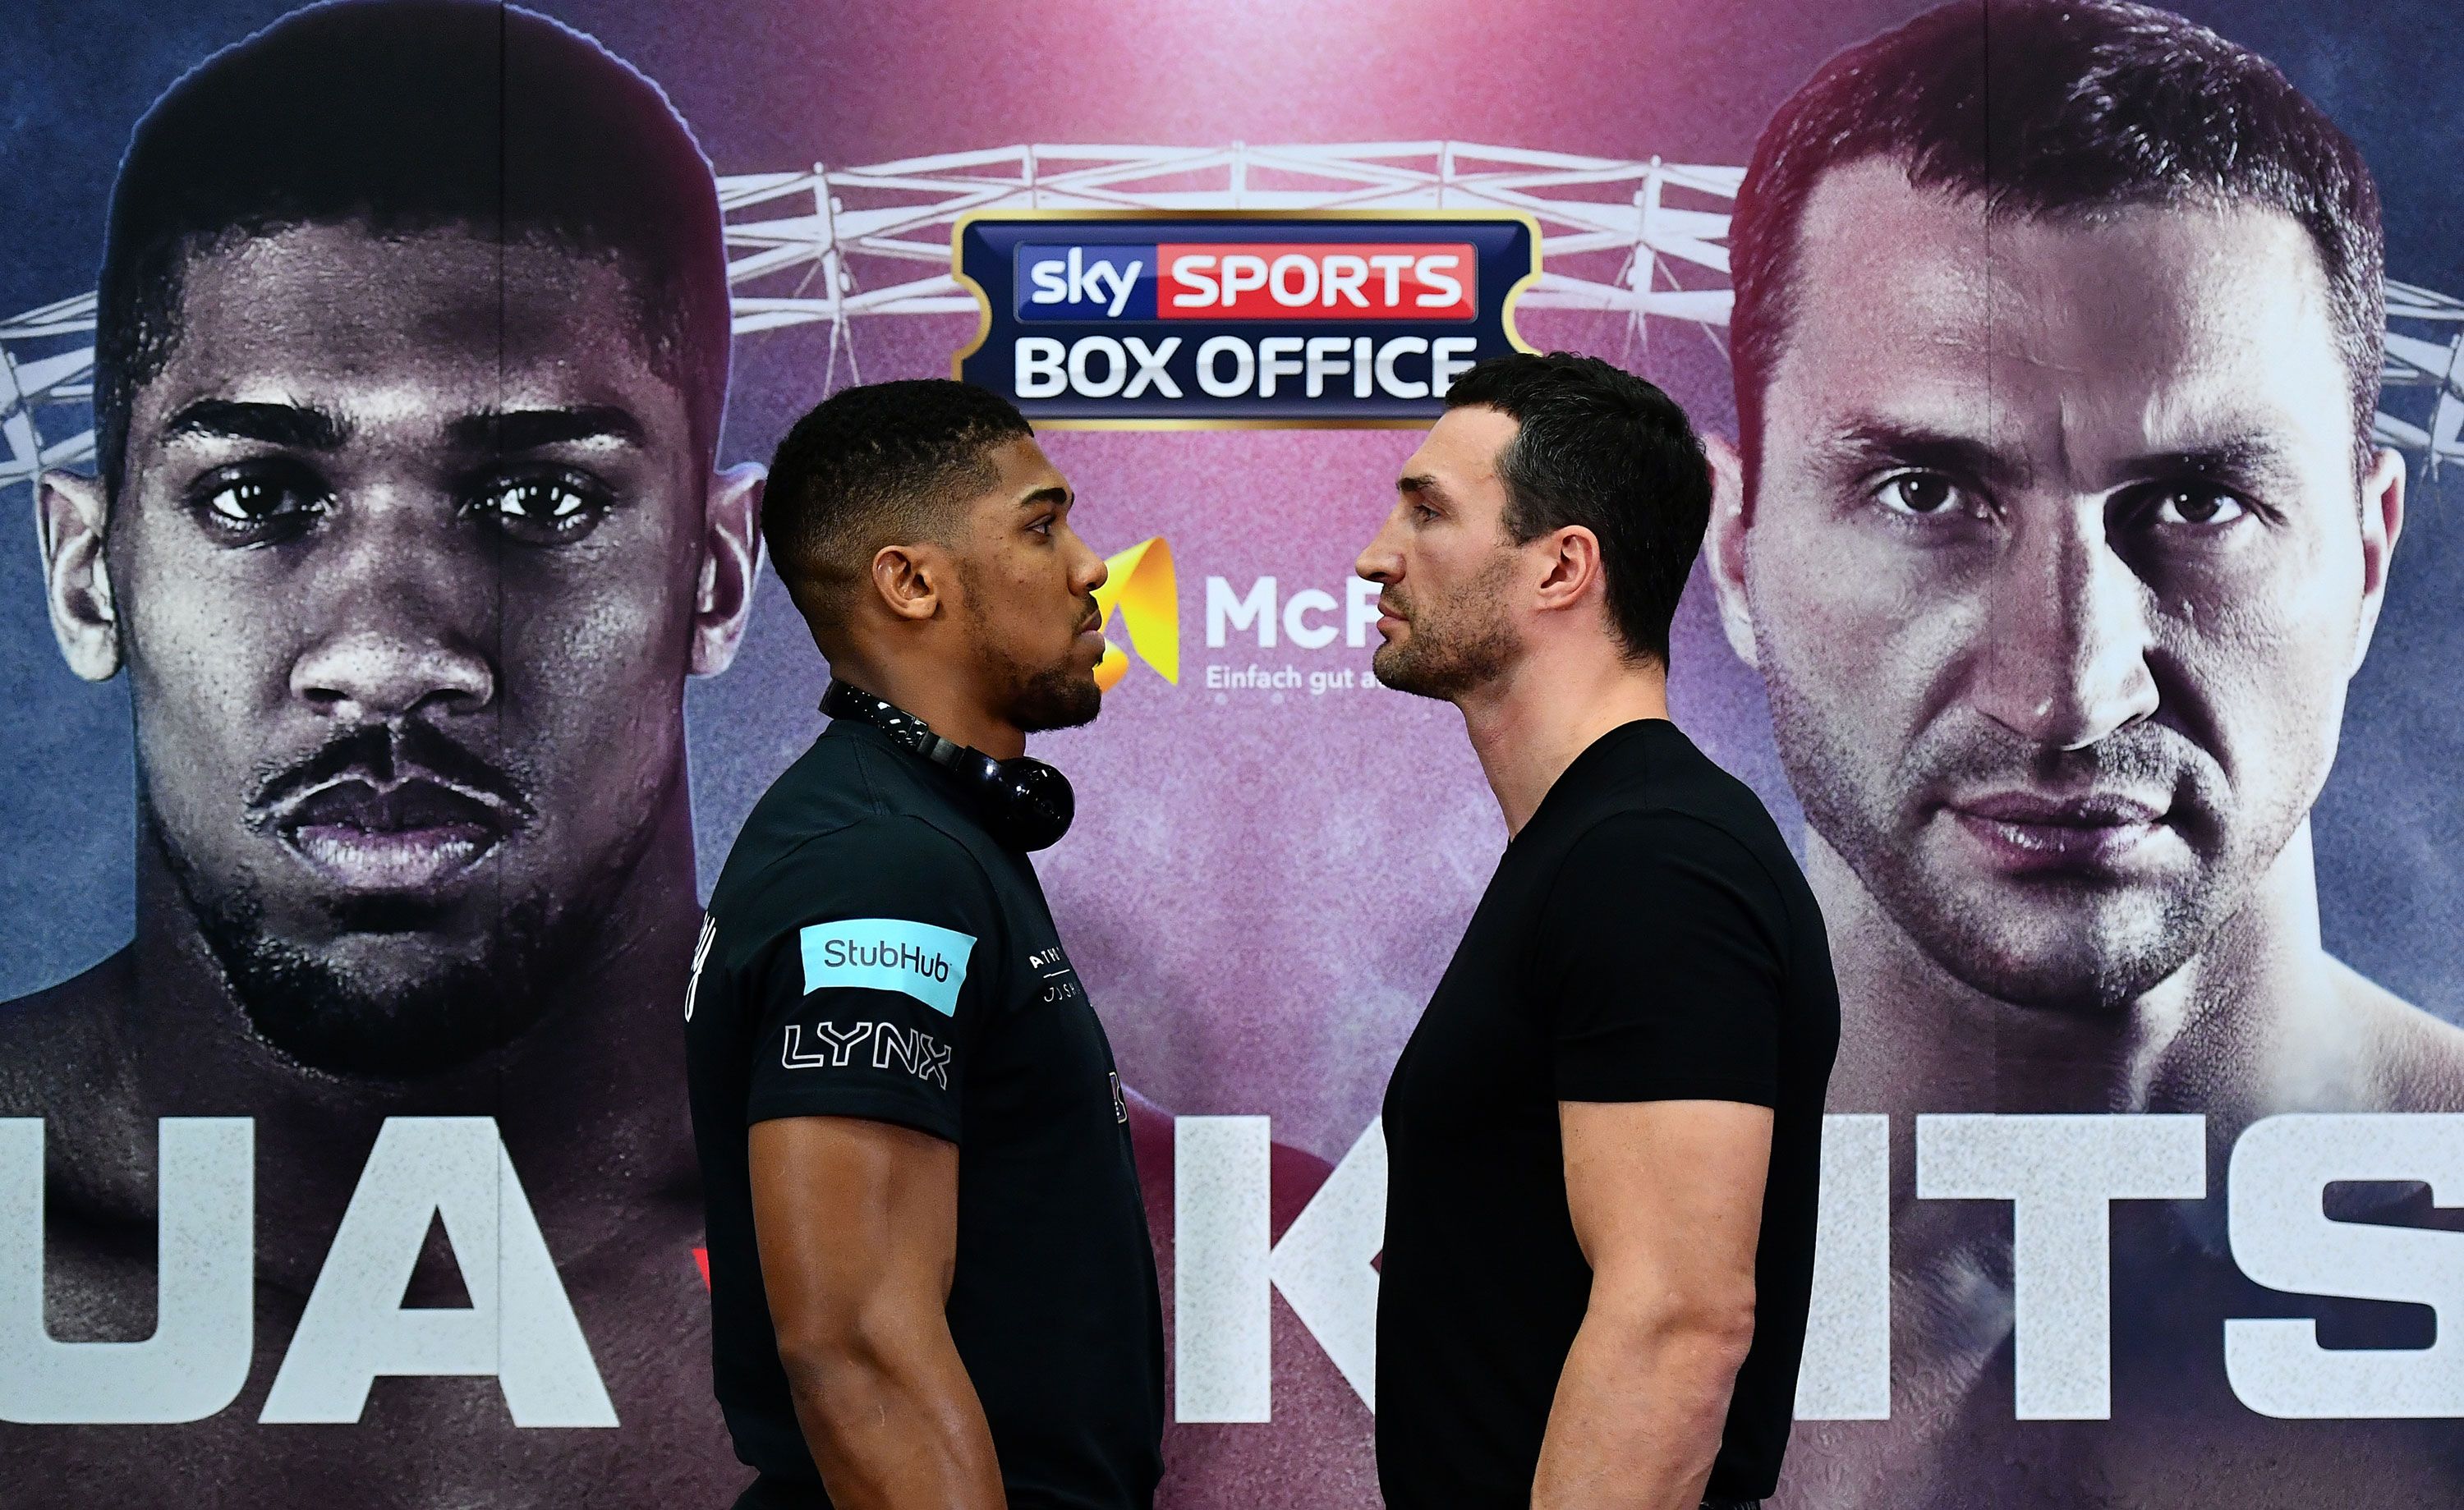 How to watch Anthony Joshua vs Wladimir Klitschko fight date, time, price, undercard and everything you need to know